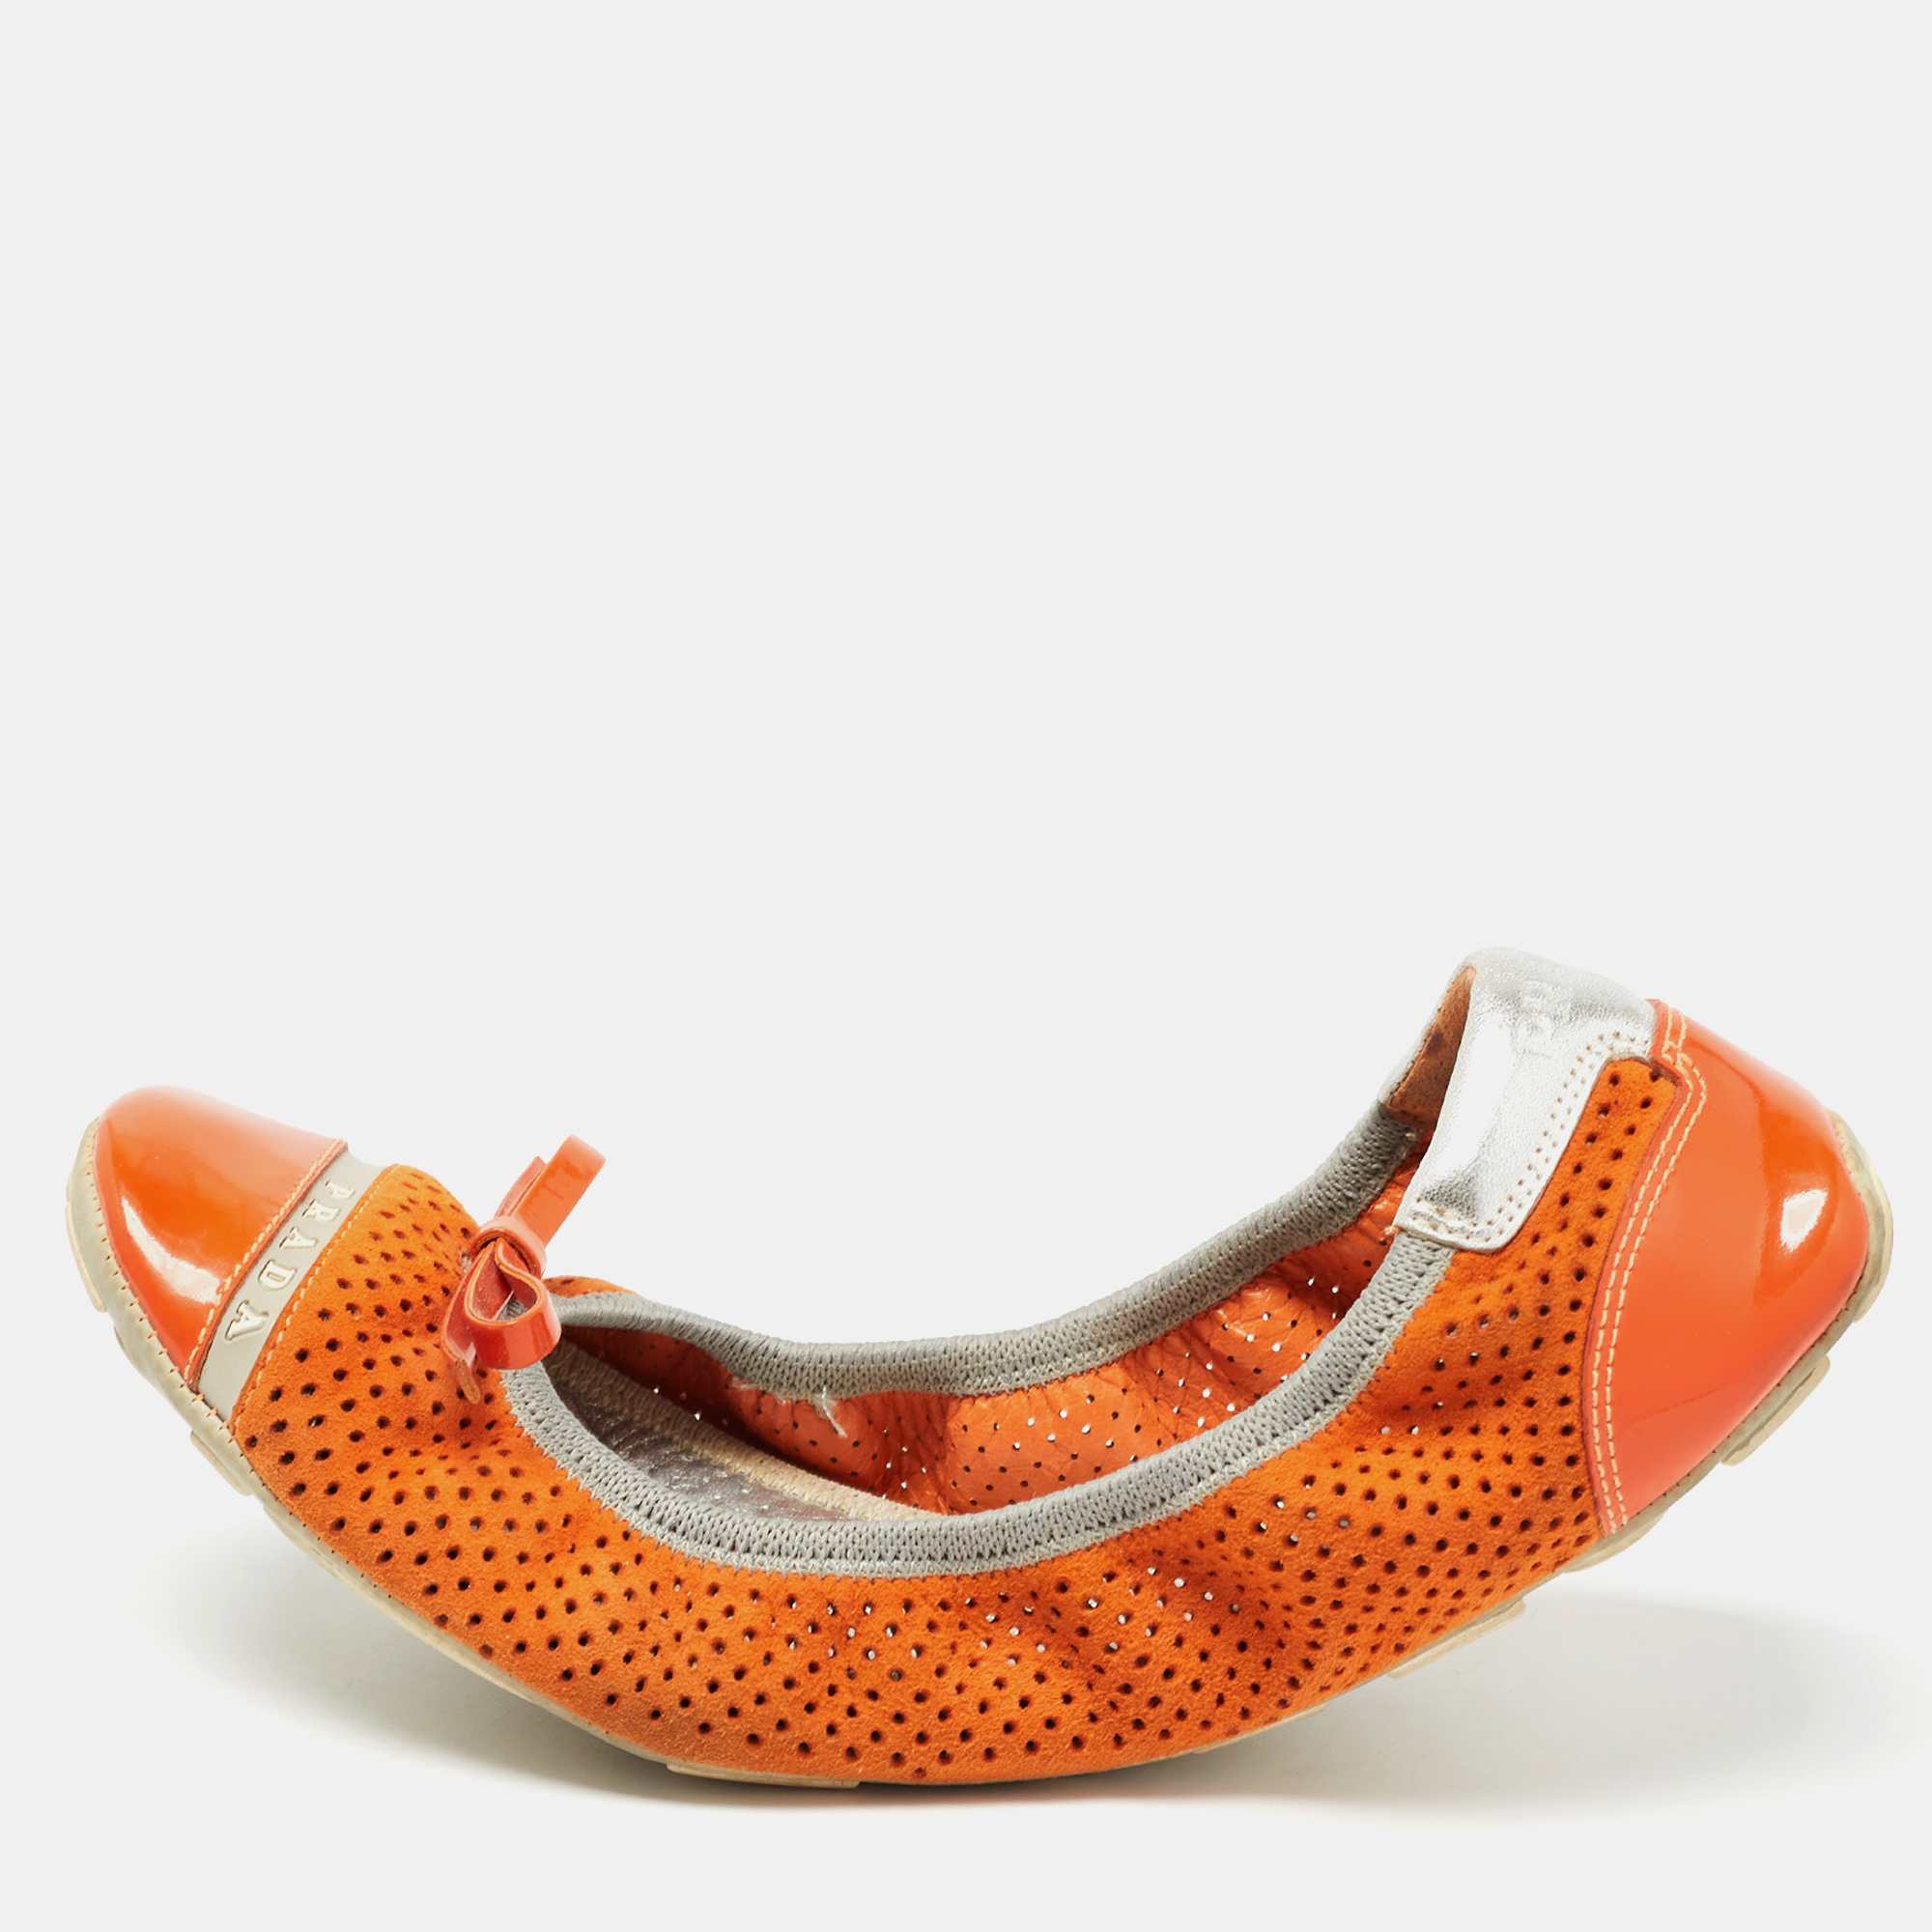 Prada sport orange perforated suede and patent bow scrunch ballet flats size 37